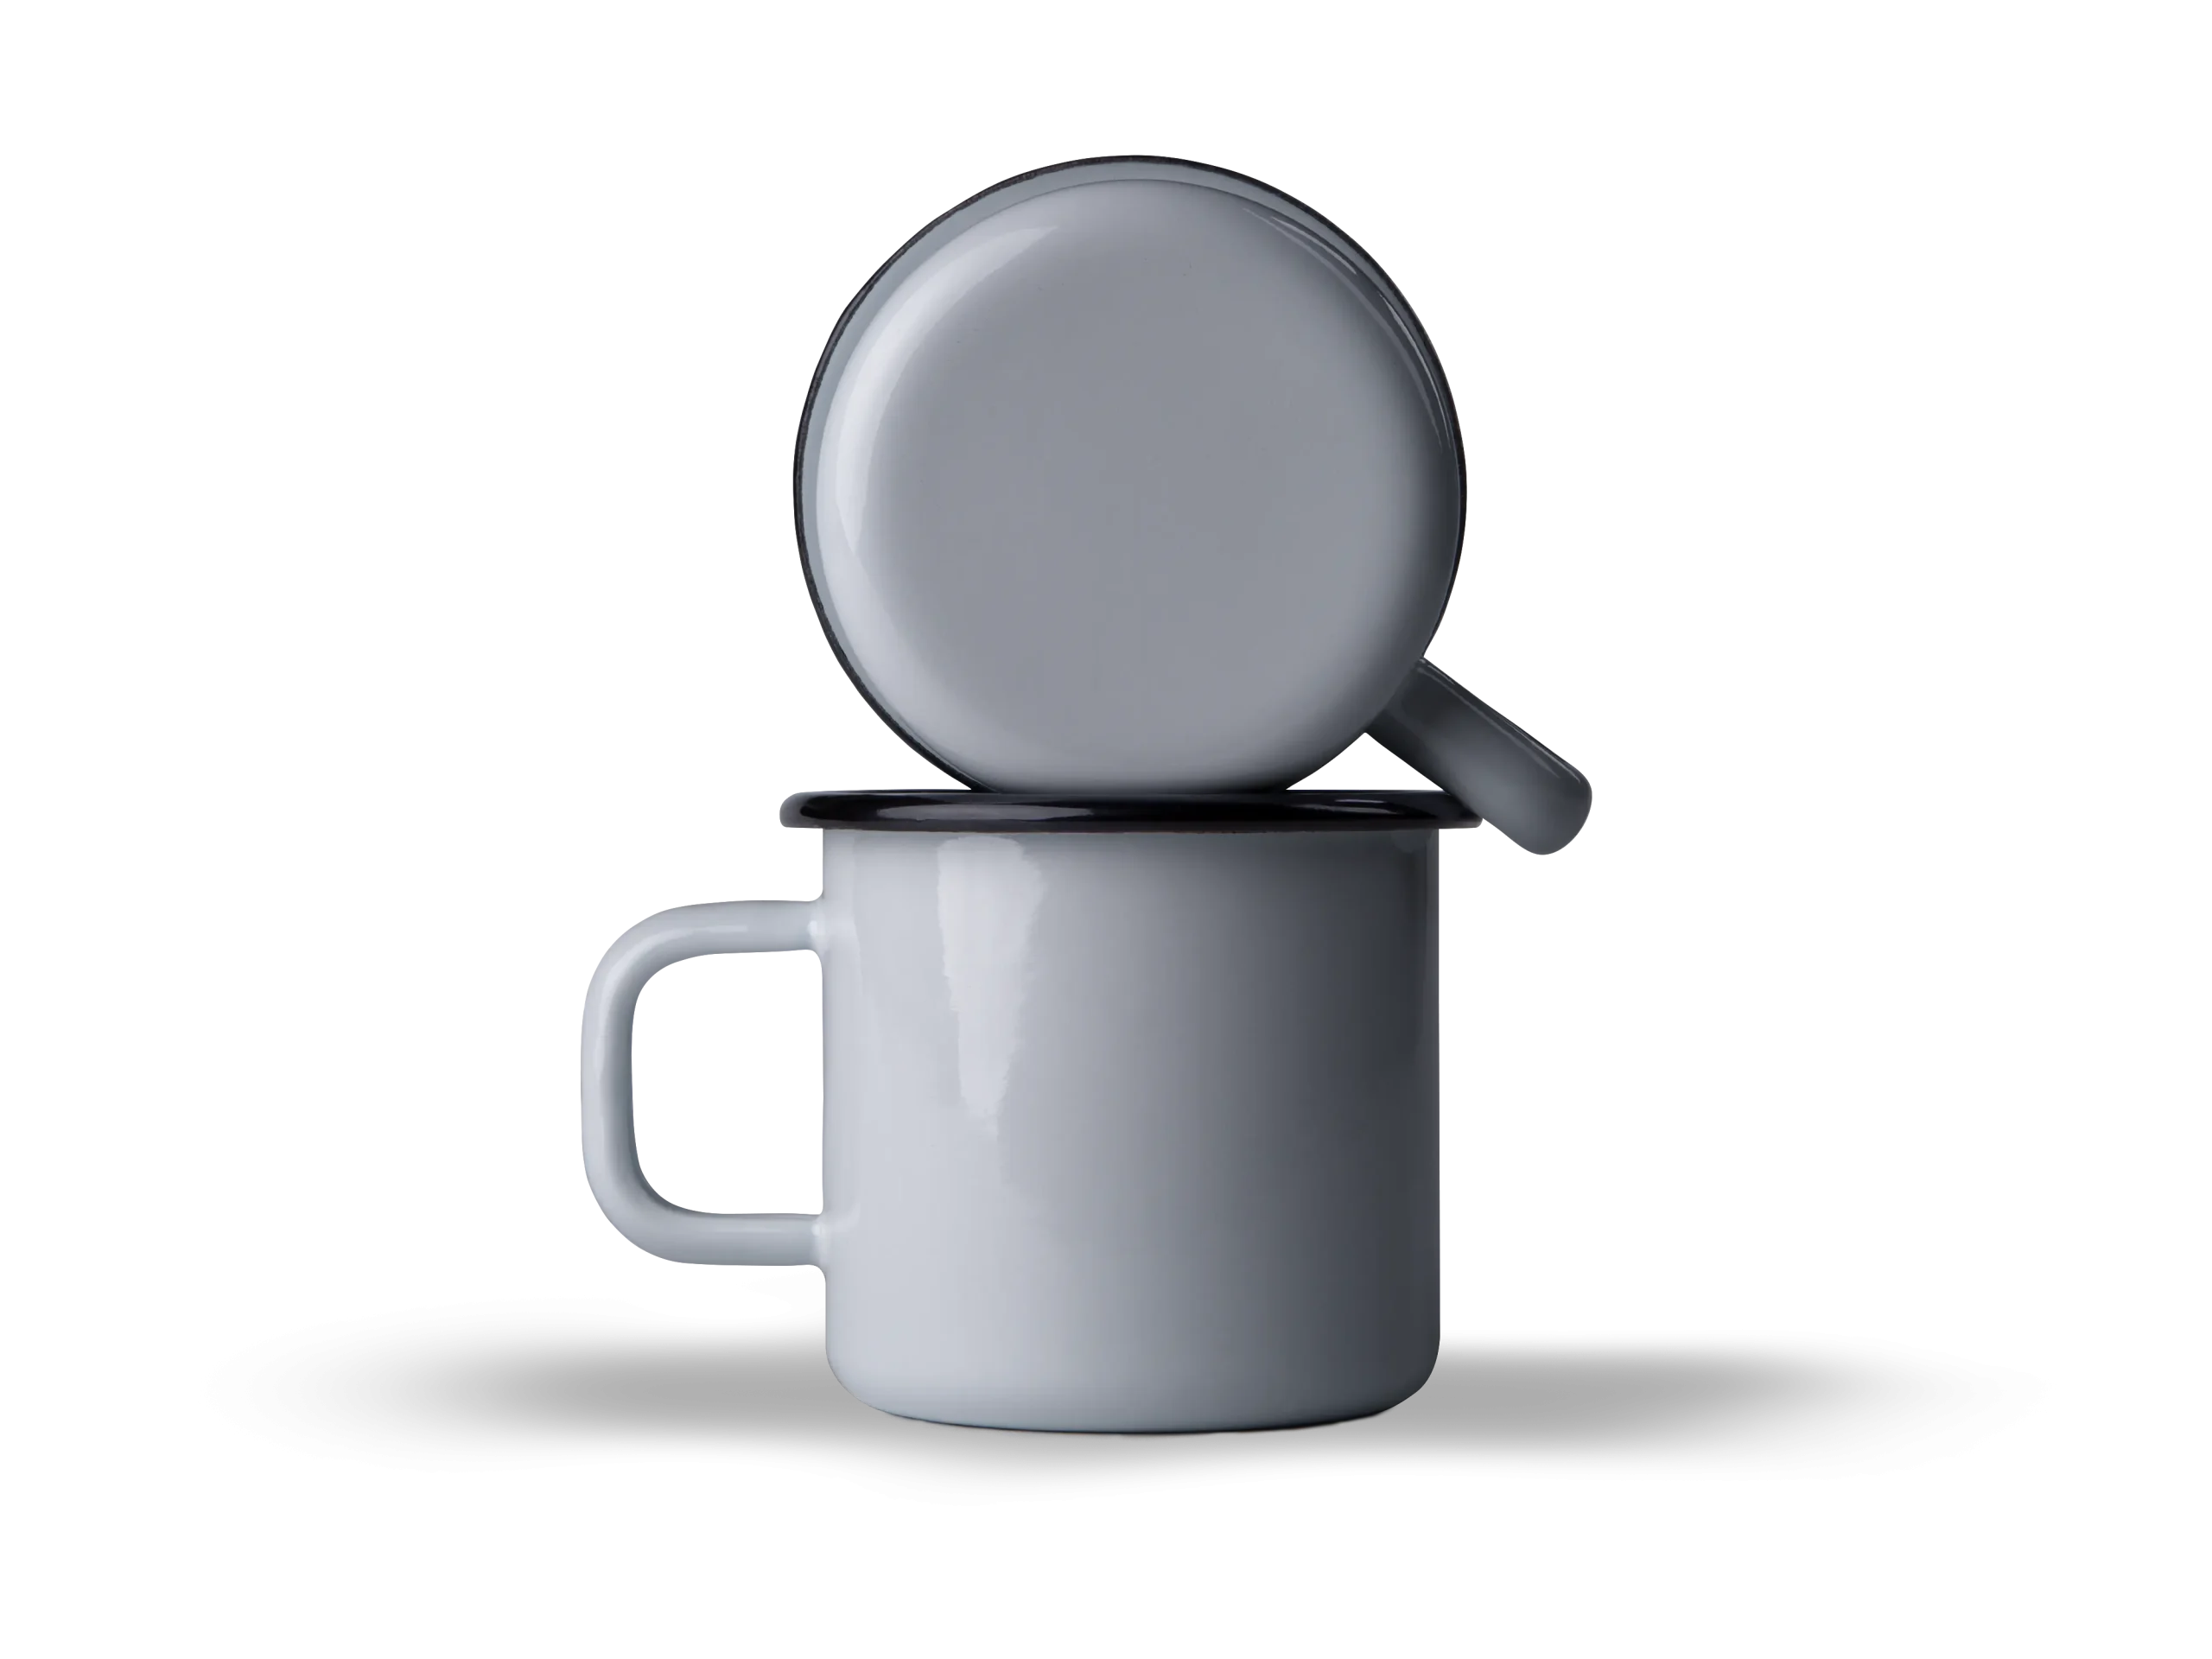 An image of two white enamel mugs stacked on top of each other. The top mug is positioned with its open end facing upwards, and its handle is visible. Both mugs have a dark rim at the top, providing a contrast to their otherwise pure white color. The background is dark with horizontal lines, giving the impression that the mugs are floating in a dark space. The simplicity of the mugs against the dark background creates a minimalist aesthetic.